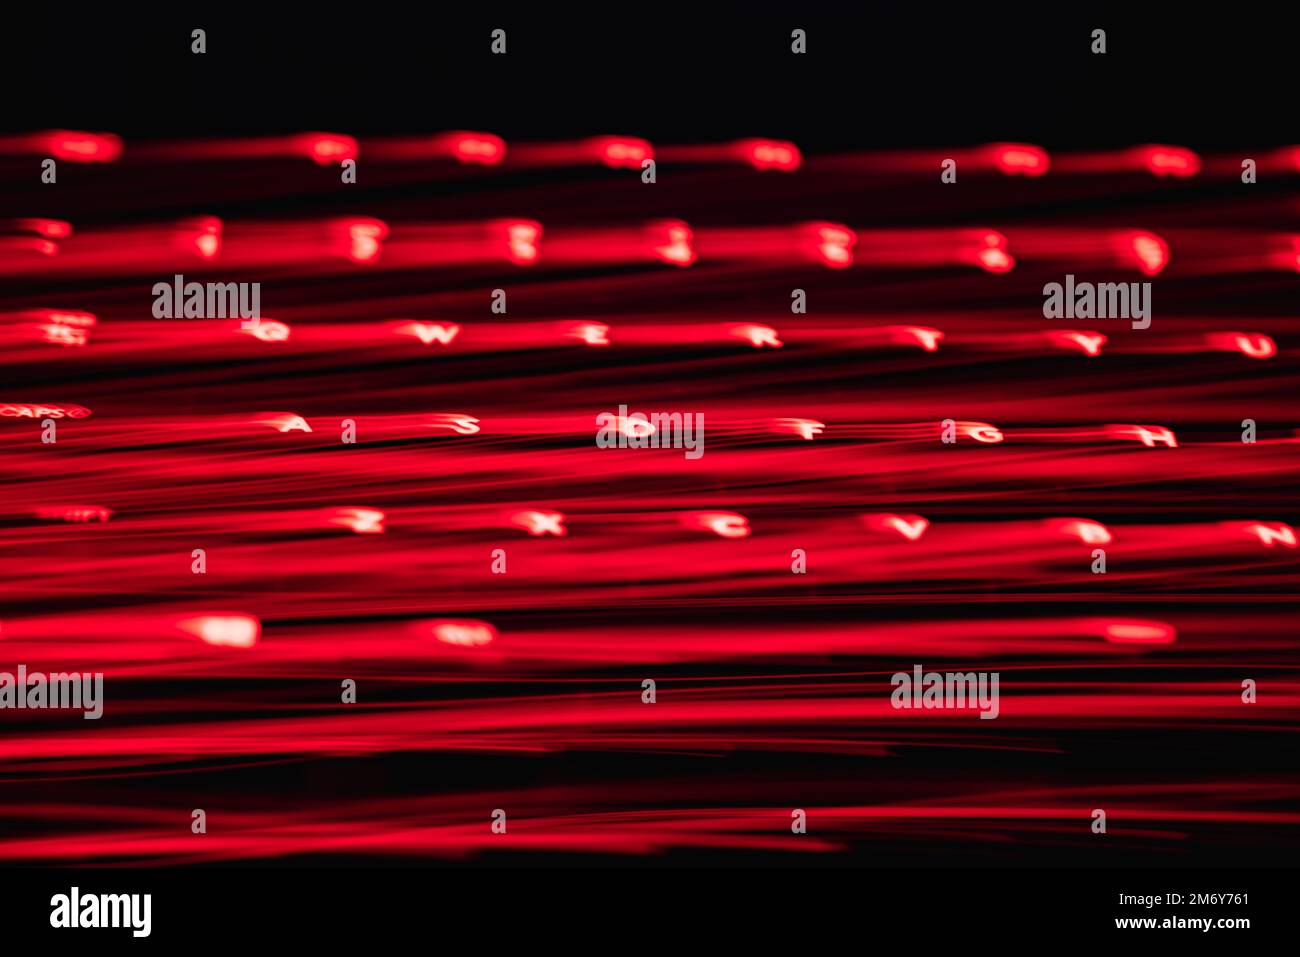 Light painting keyboard letters and numbers. Beautiful colorful background. Long exposure light painting,red color curved lines in vibrant neon. Stock Photo